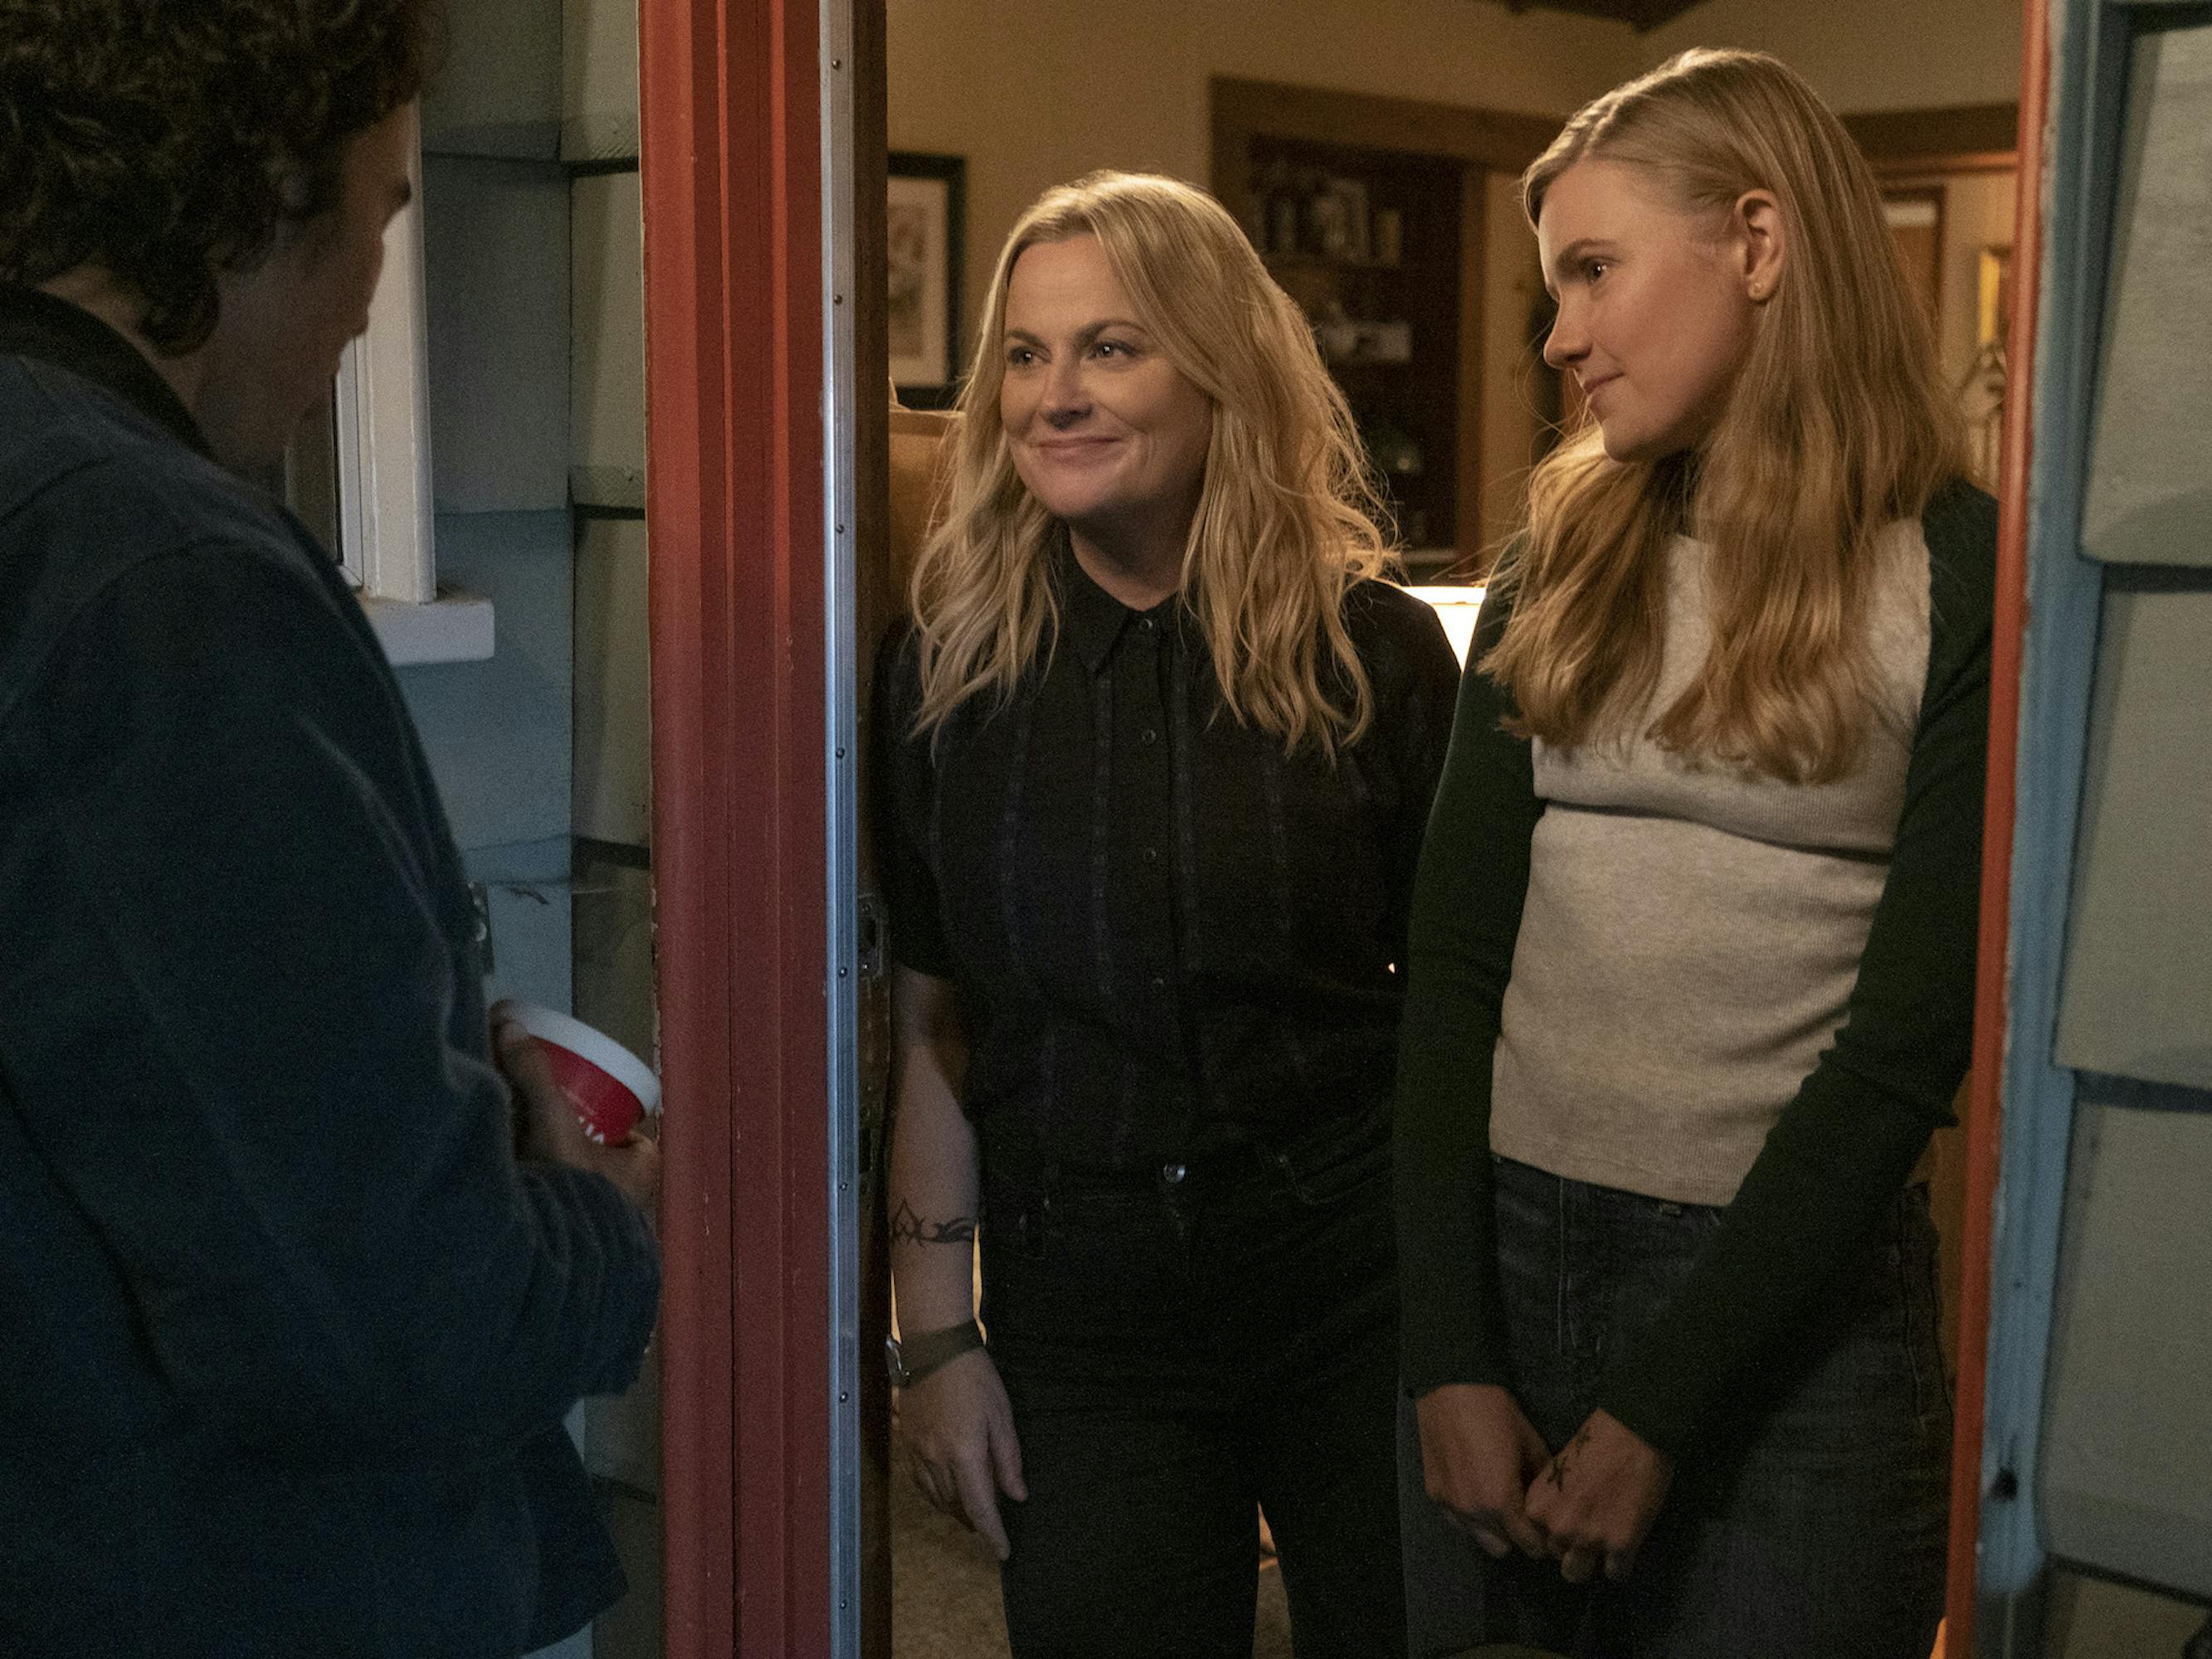 Lisa Johnson (Amy Poehler) and Vivian Carter (Hadley Robinson) stand in a doorframe.